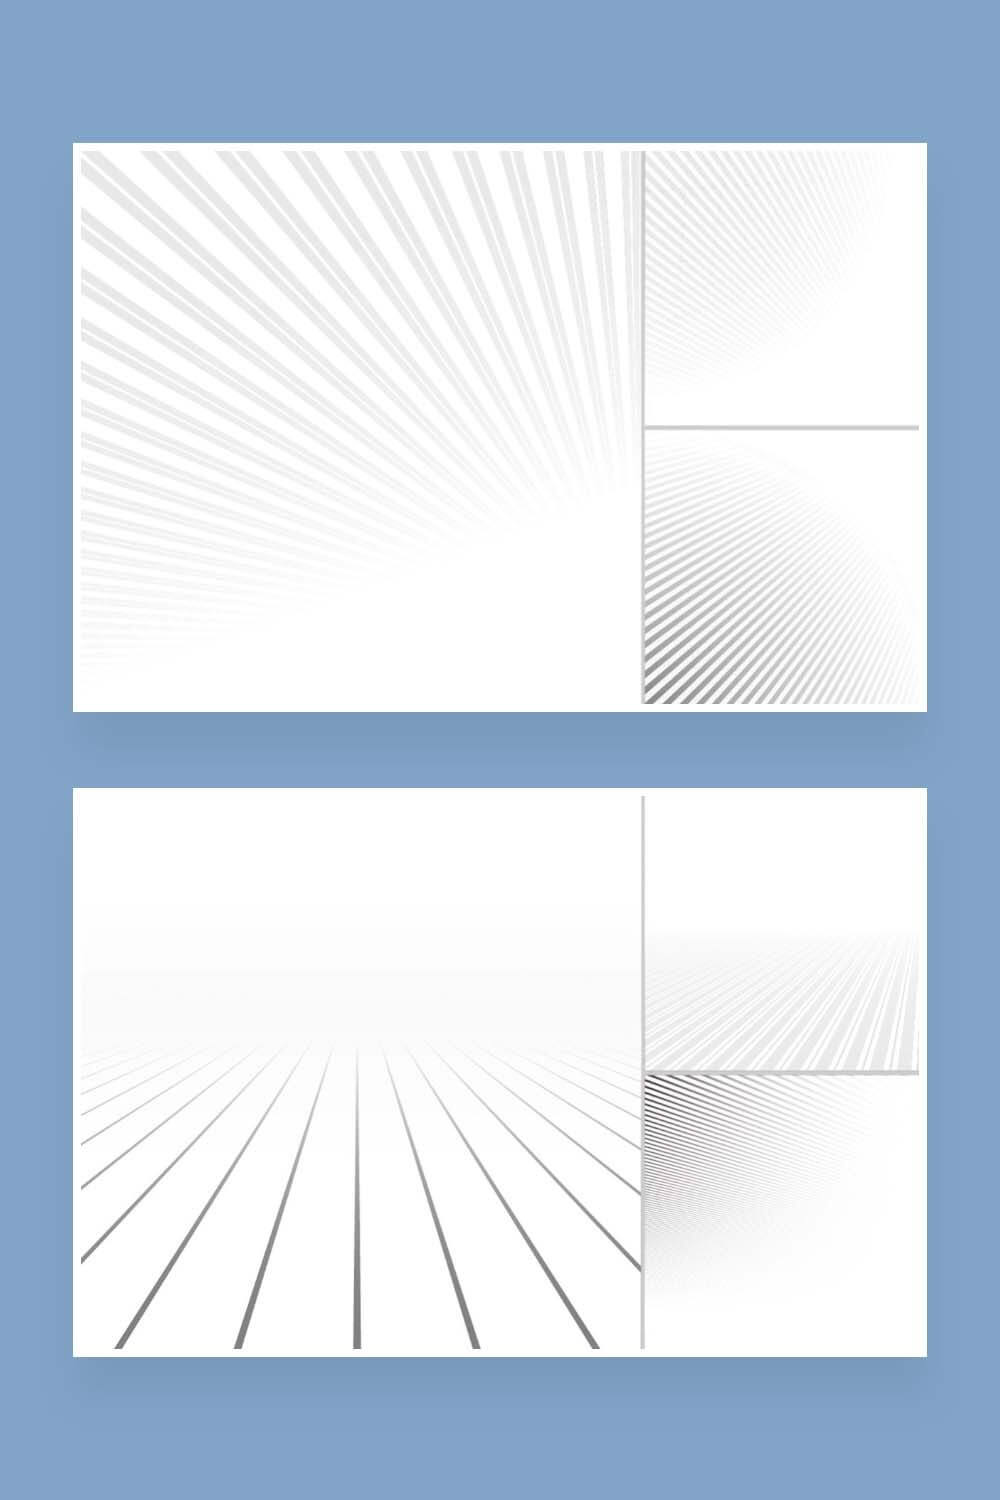 Two pictures with models of lines in different directions, highlights of an abstract background with a perspective.